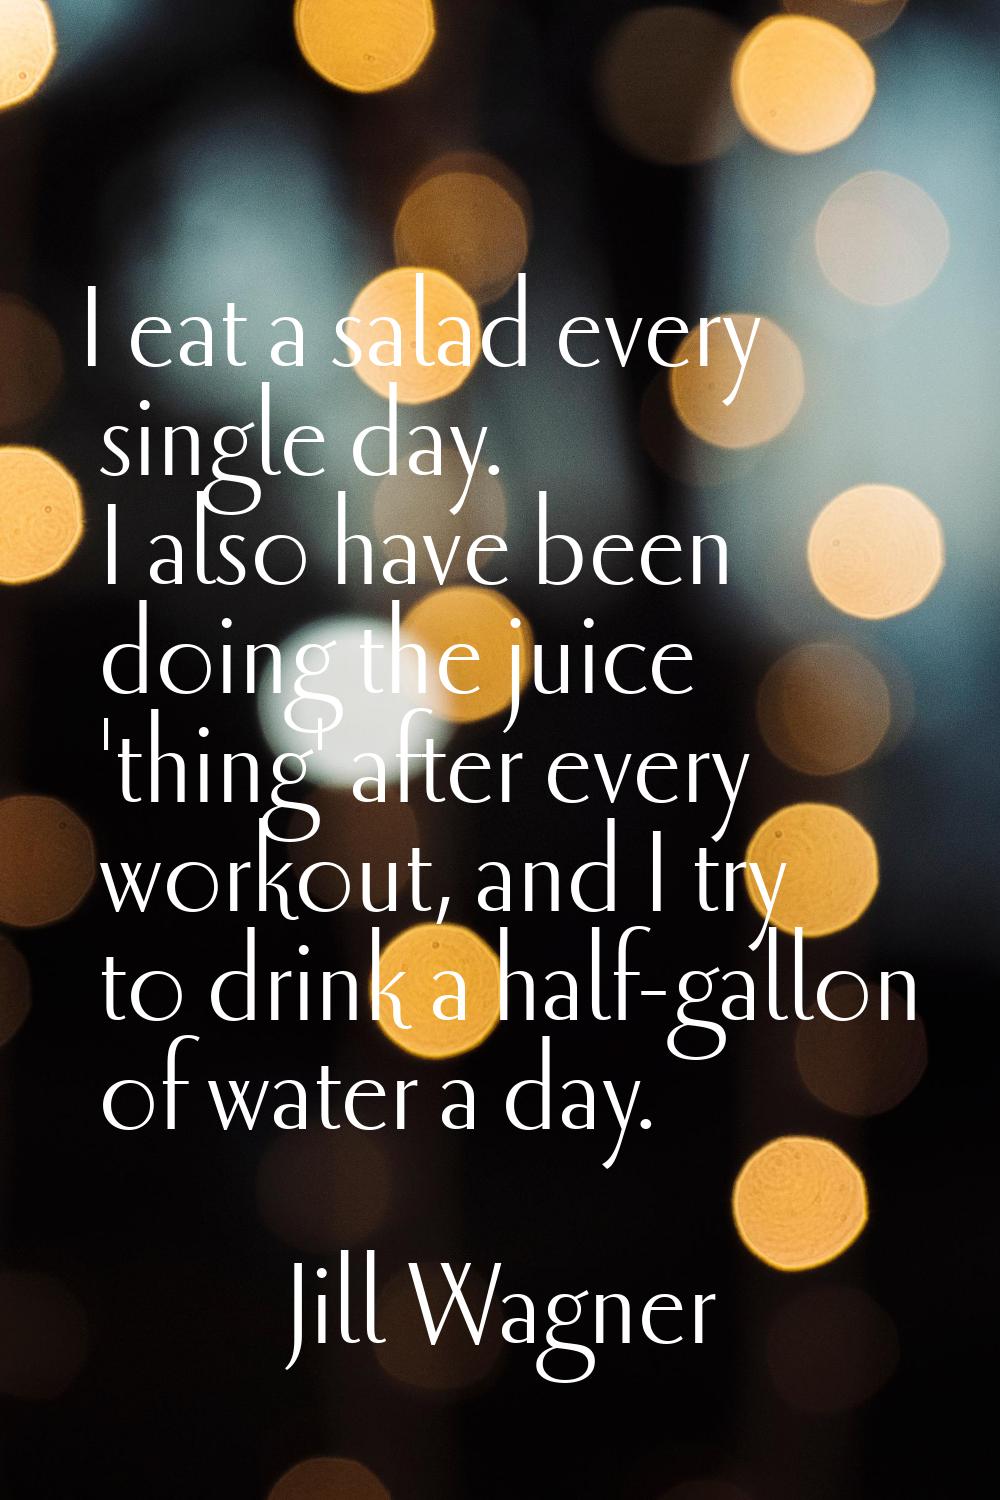 I eat a salad every single day. I also have been doing the juice 'thing' after every workout, and I